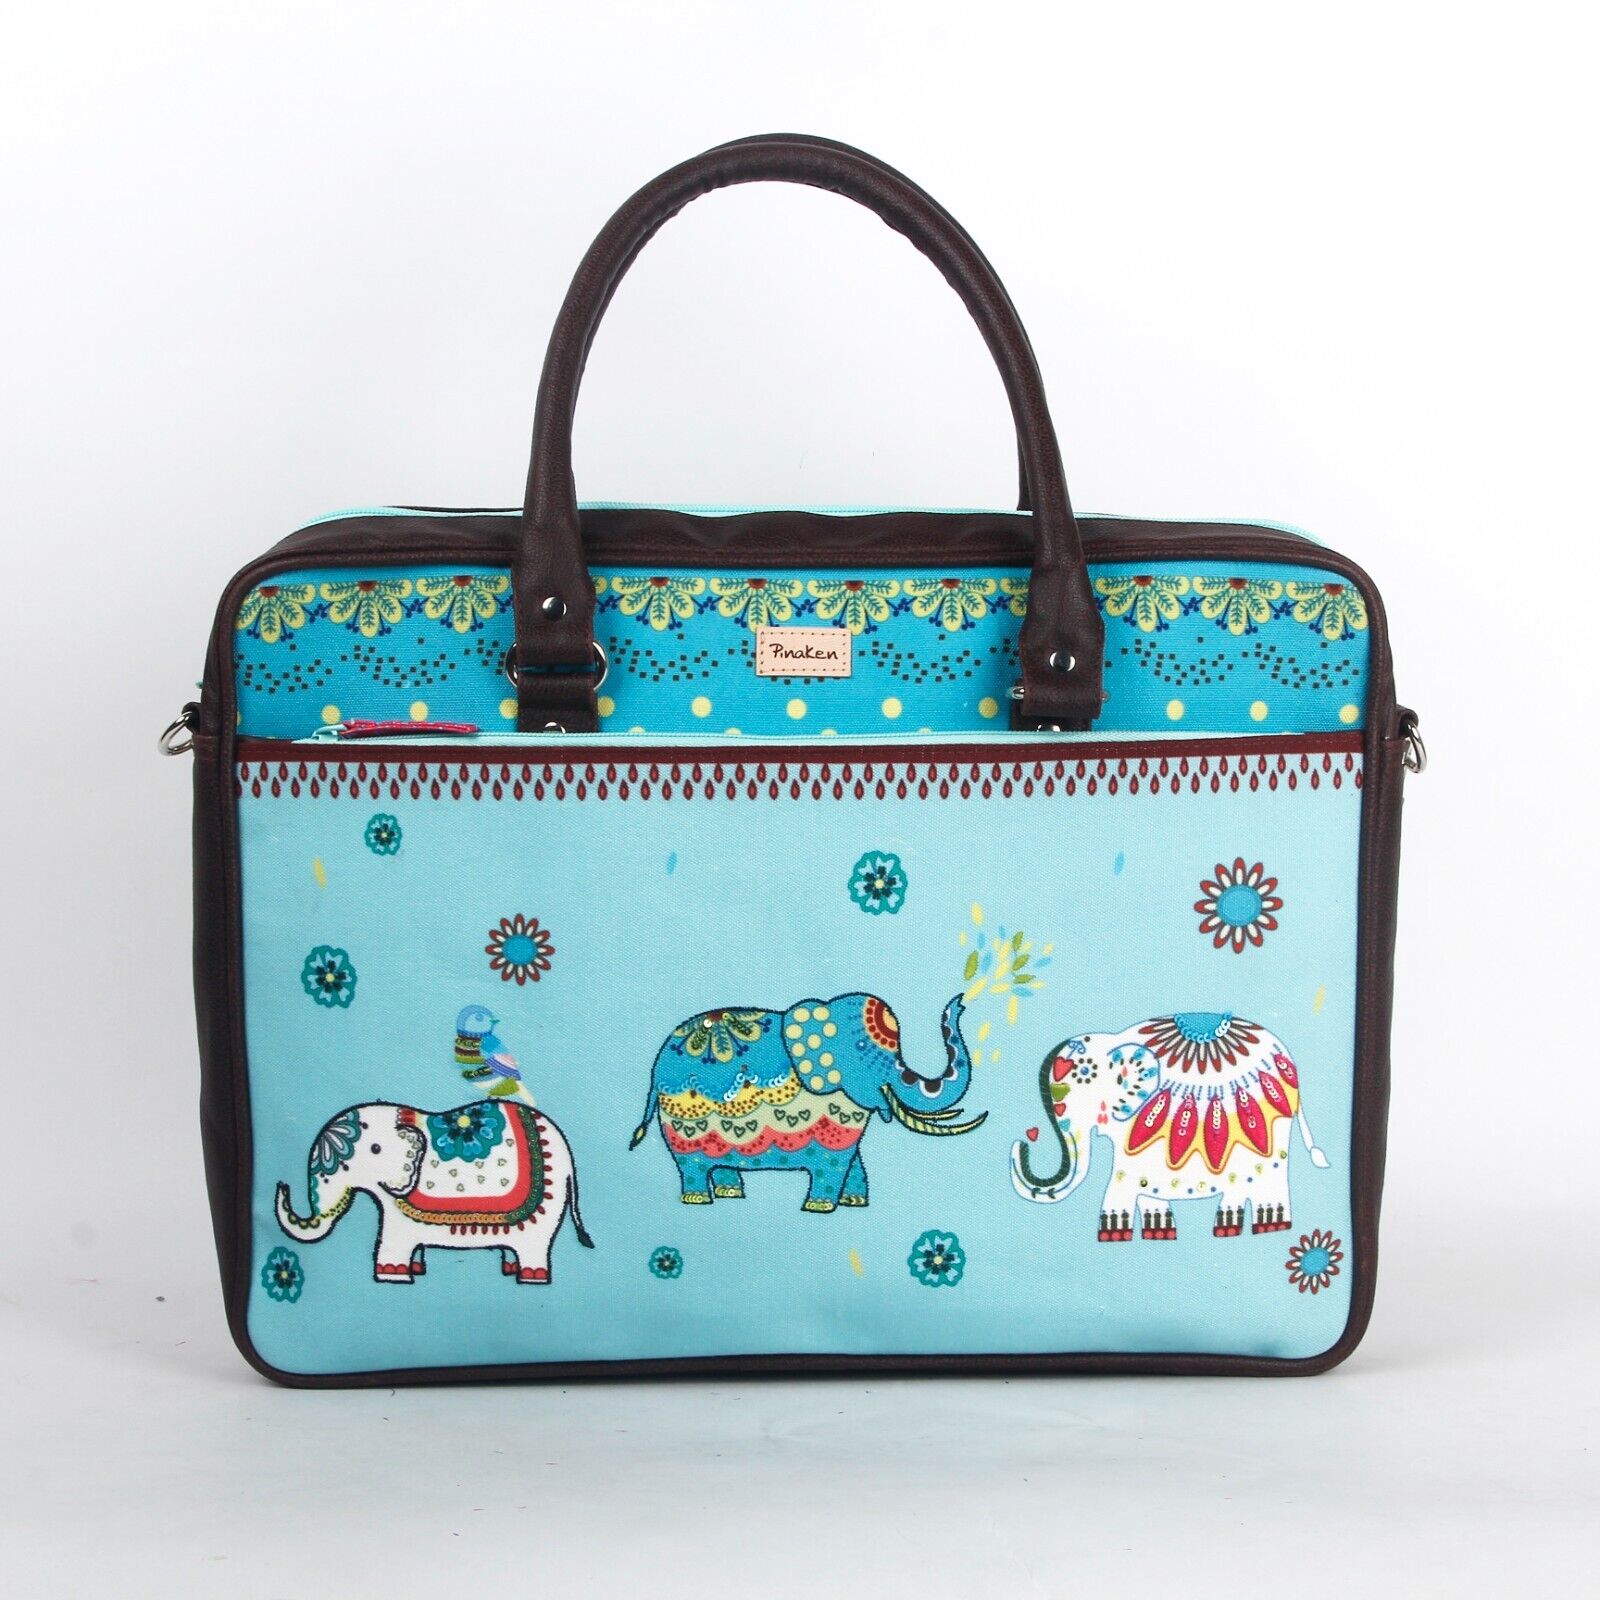 Jumbo Trunk Laptop Sleeve Bag with Elephant Printed for Women